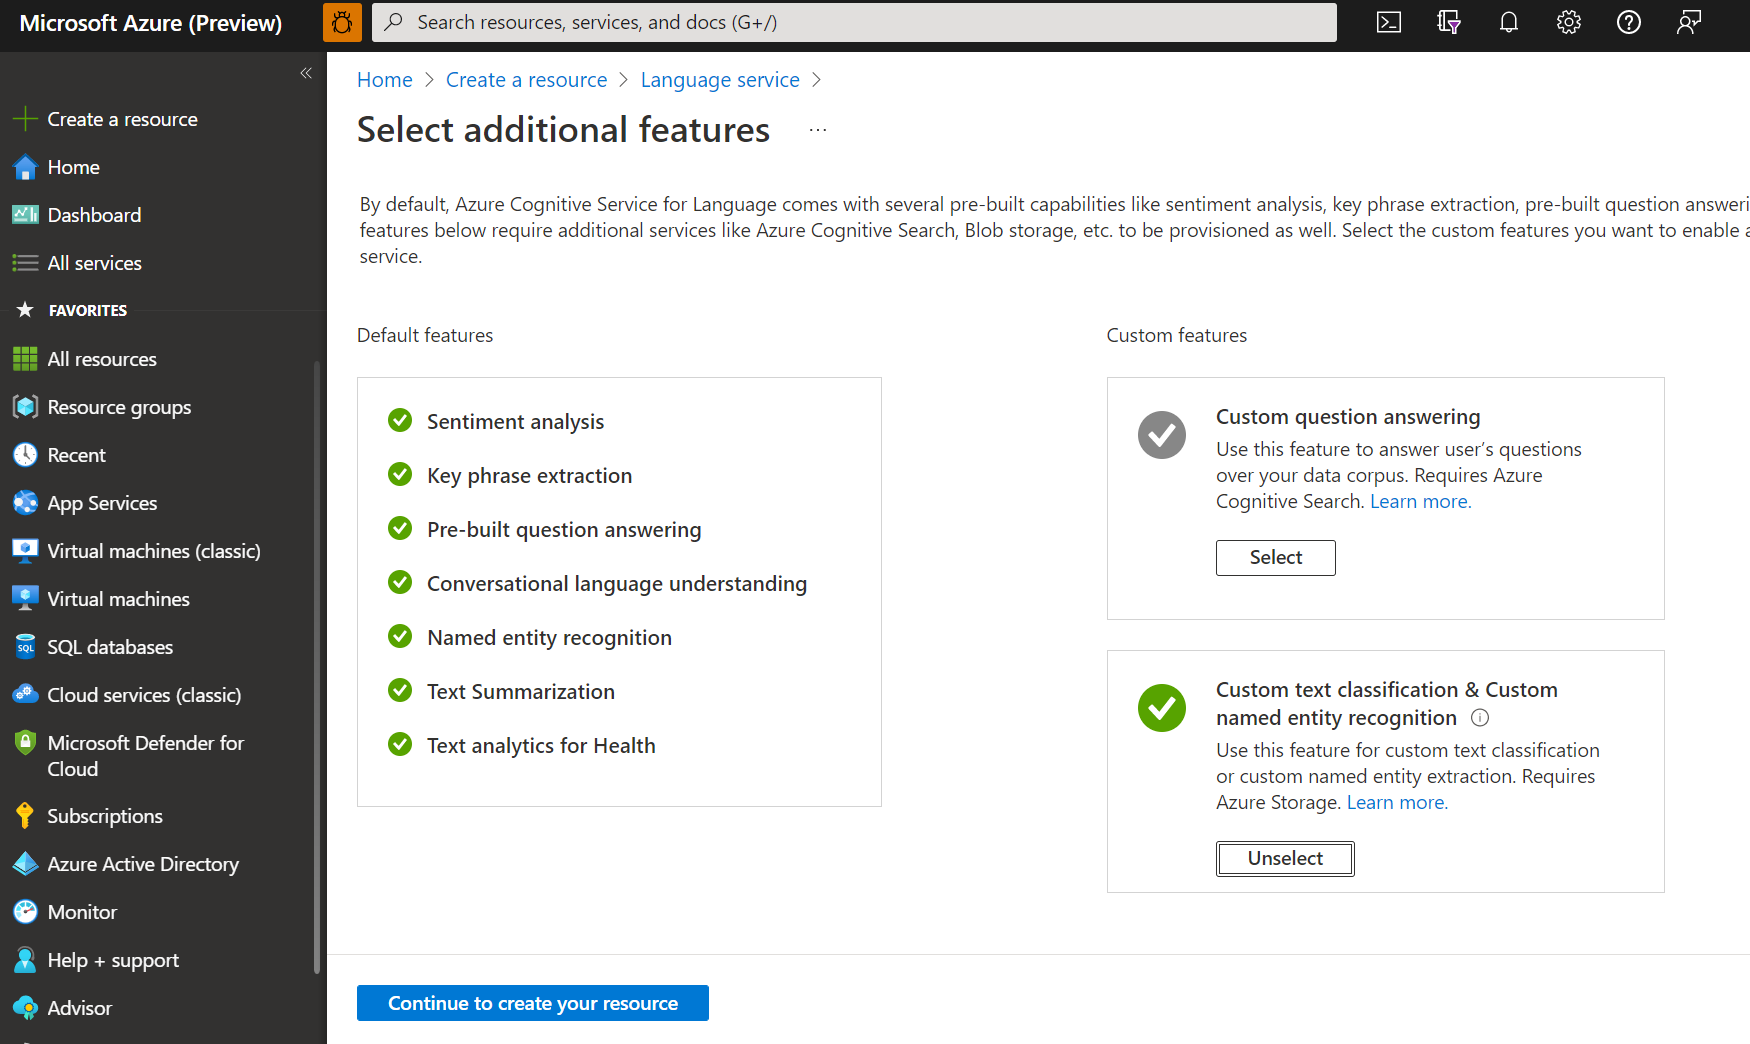 A screenshot showing custom text classification & custom named entity recognition in the Azure portal.